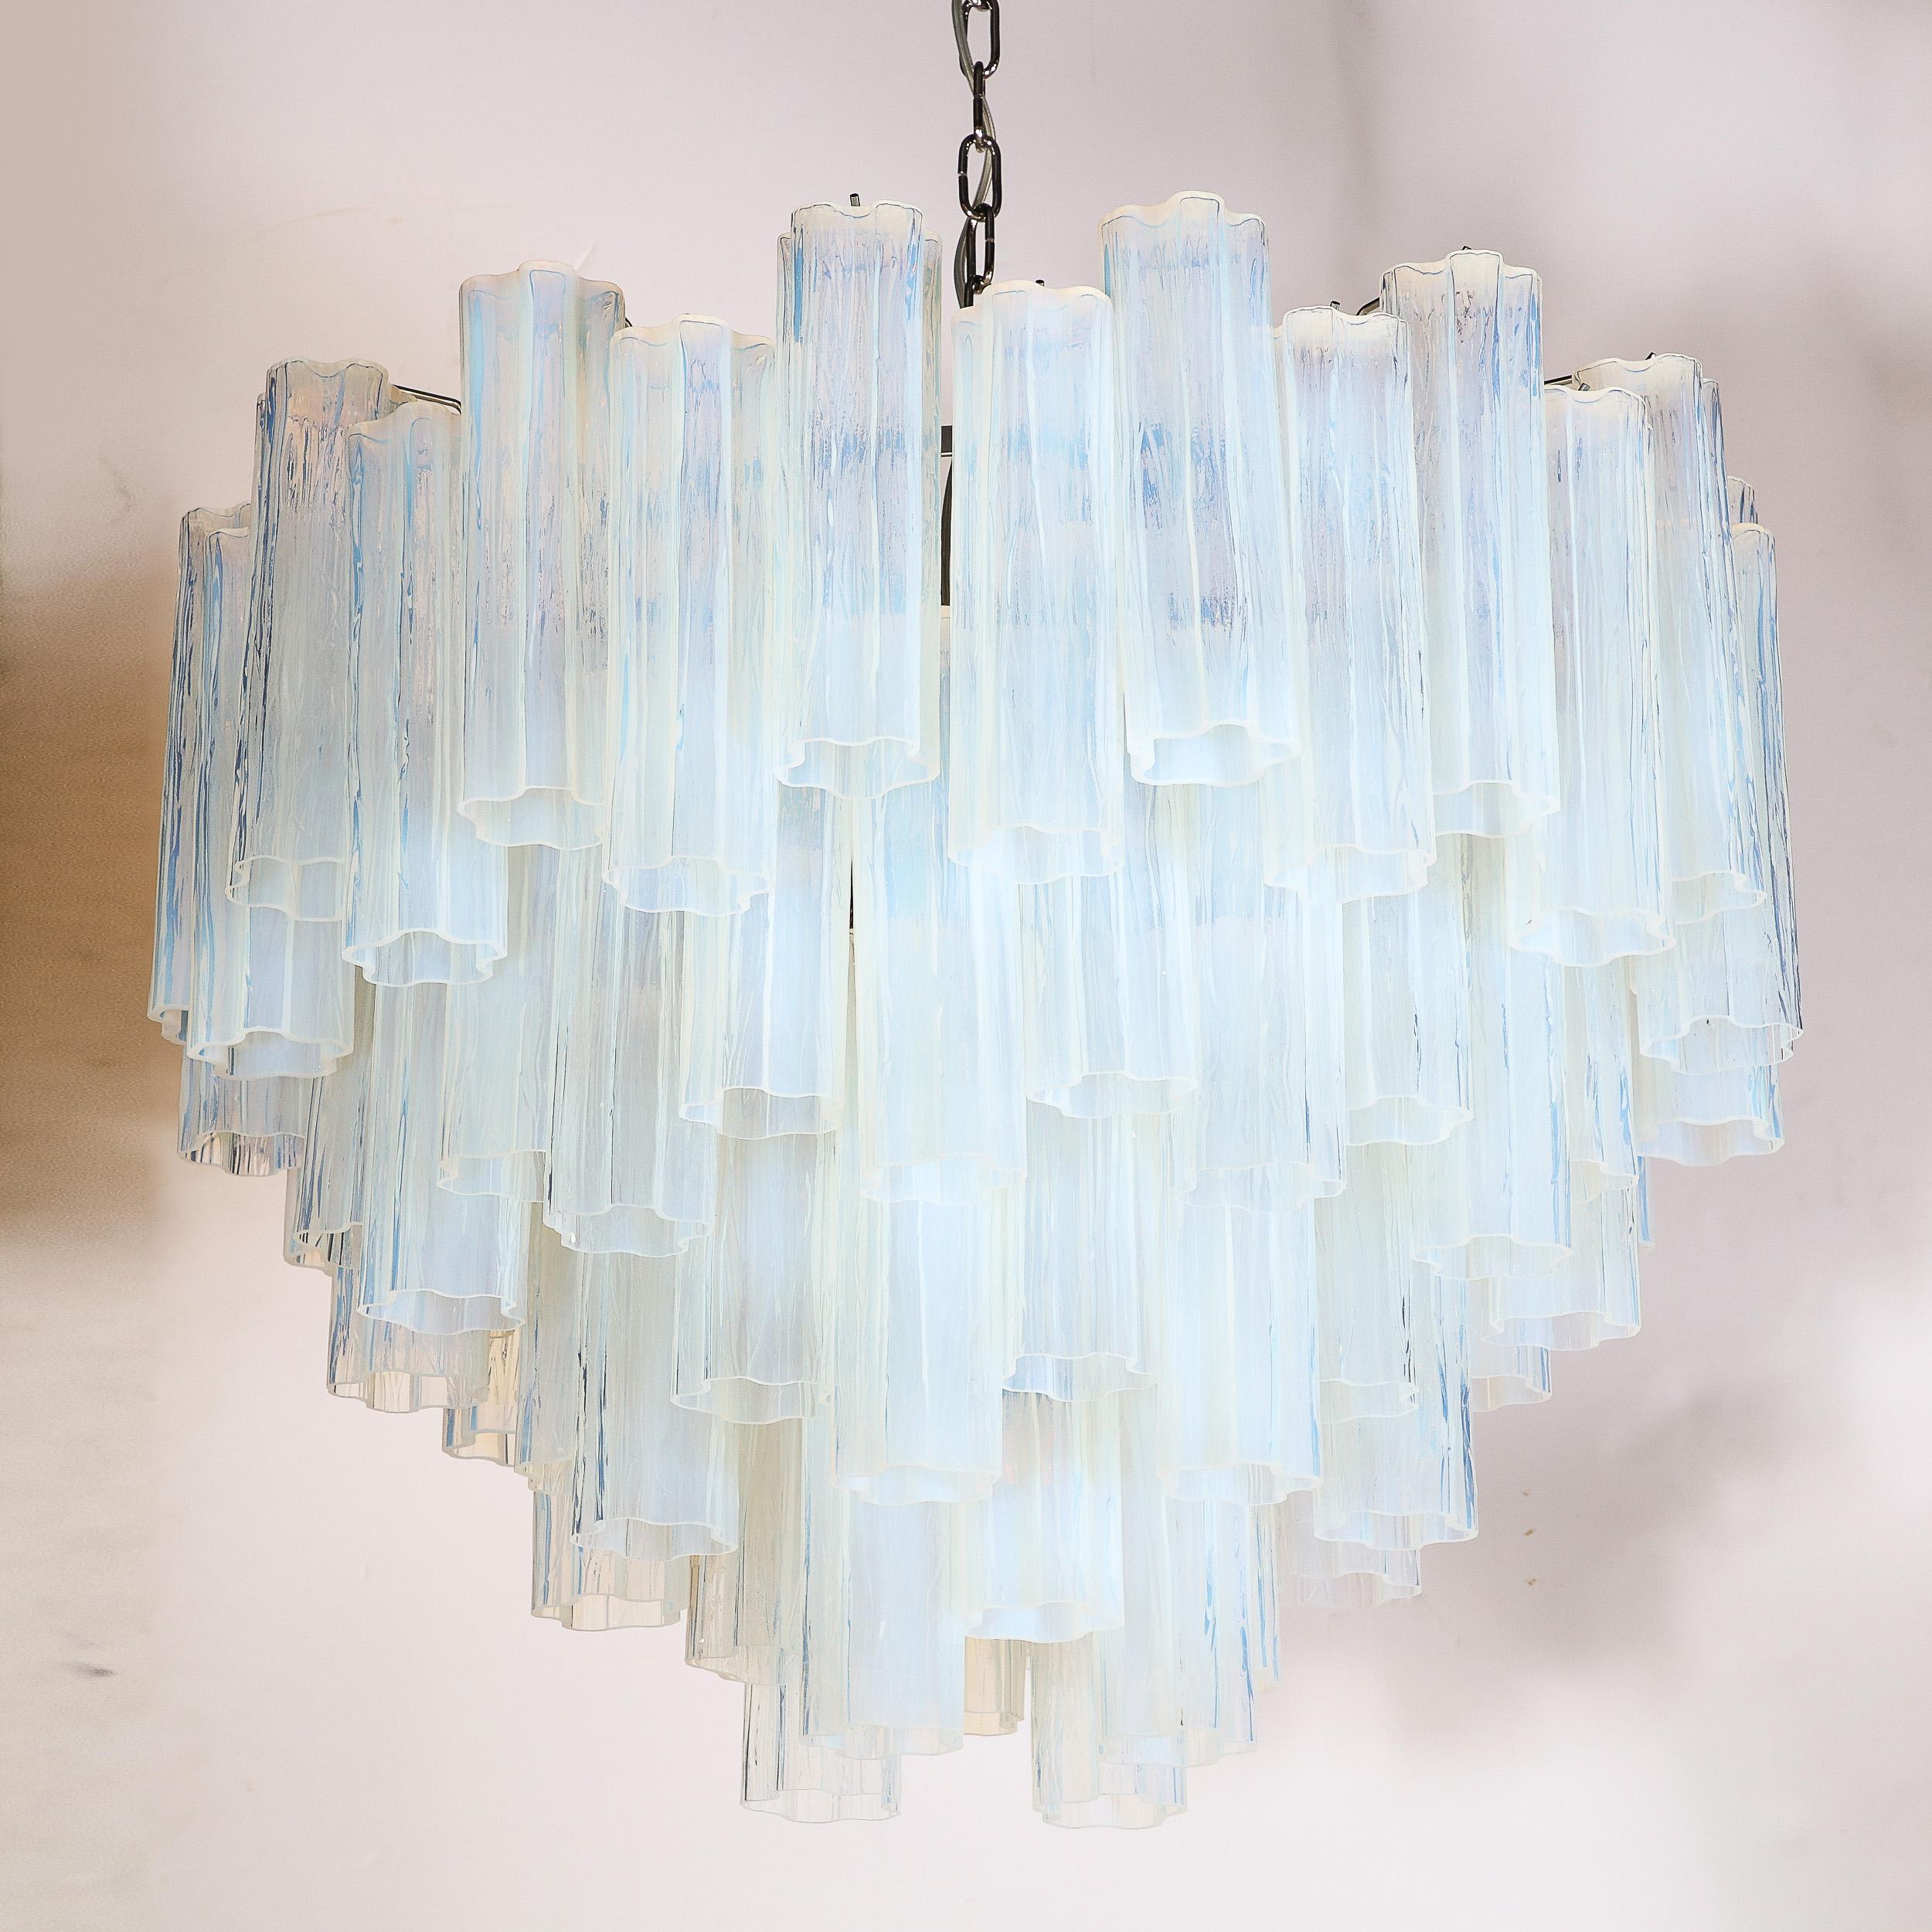 Modernist Hand-Blown Murano Opalescent Four Tiered Tronchi Glass Chandelier For Sale 11